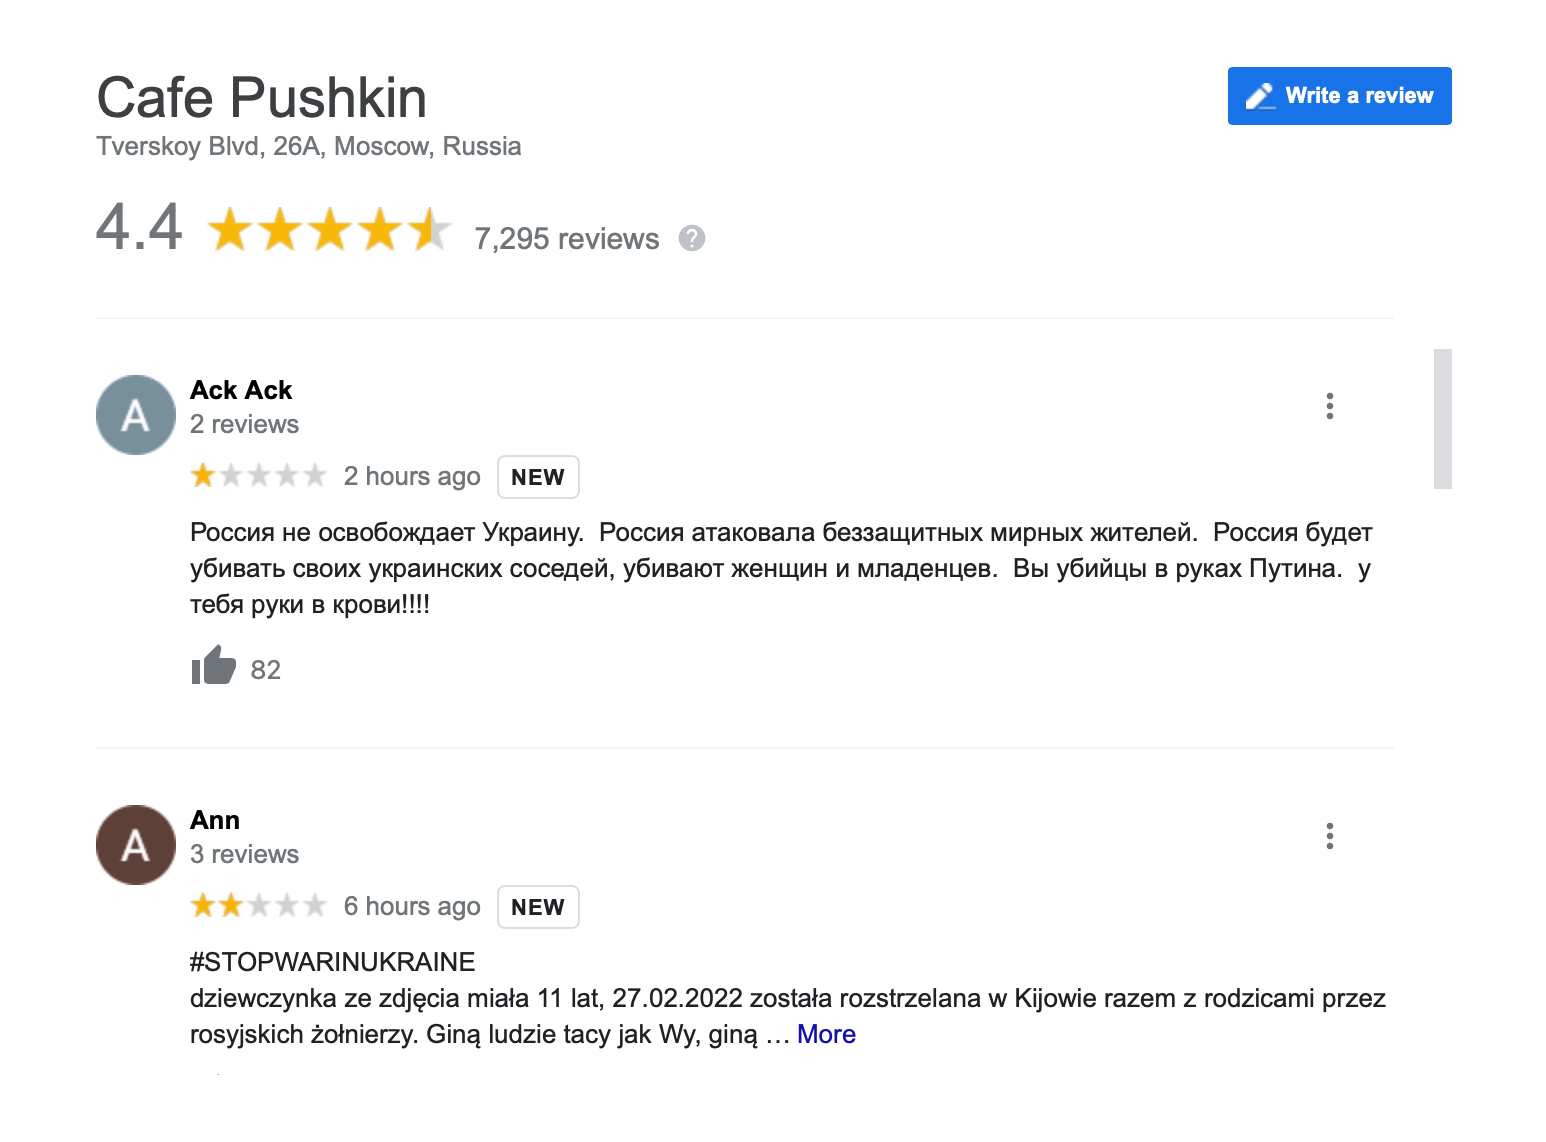 Reviews left on the Google maps page for Cafe Pushkin, in Moscow